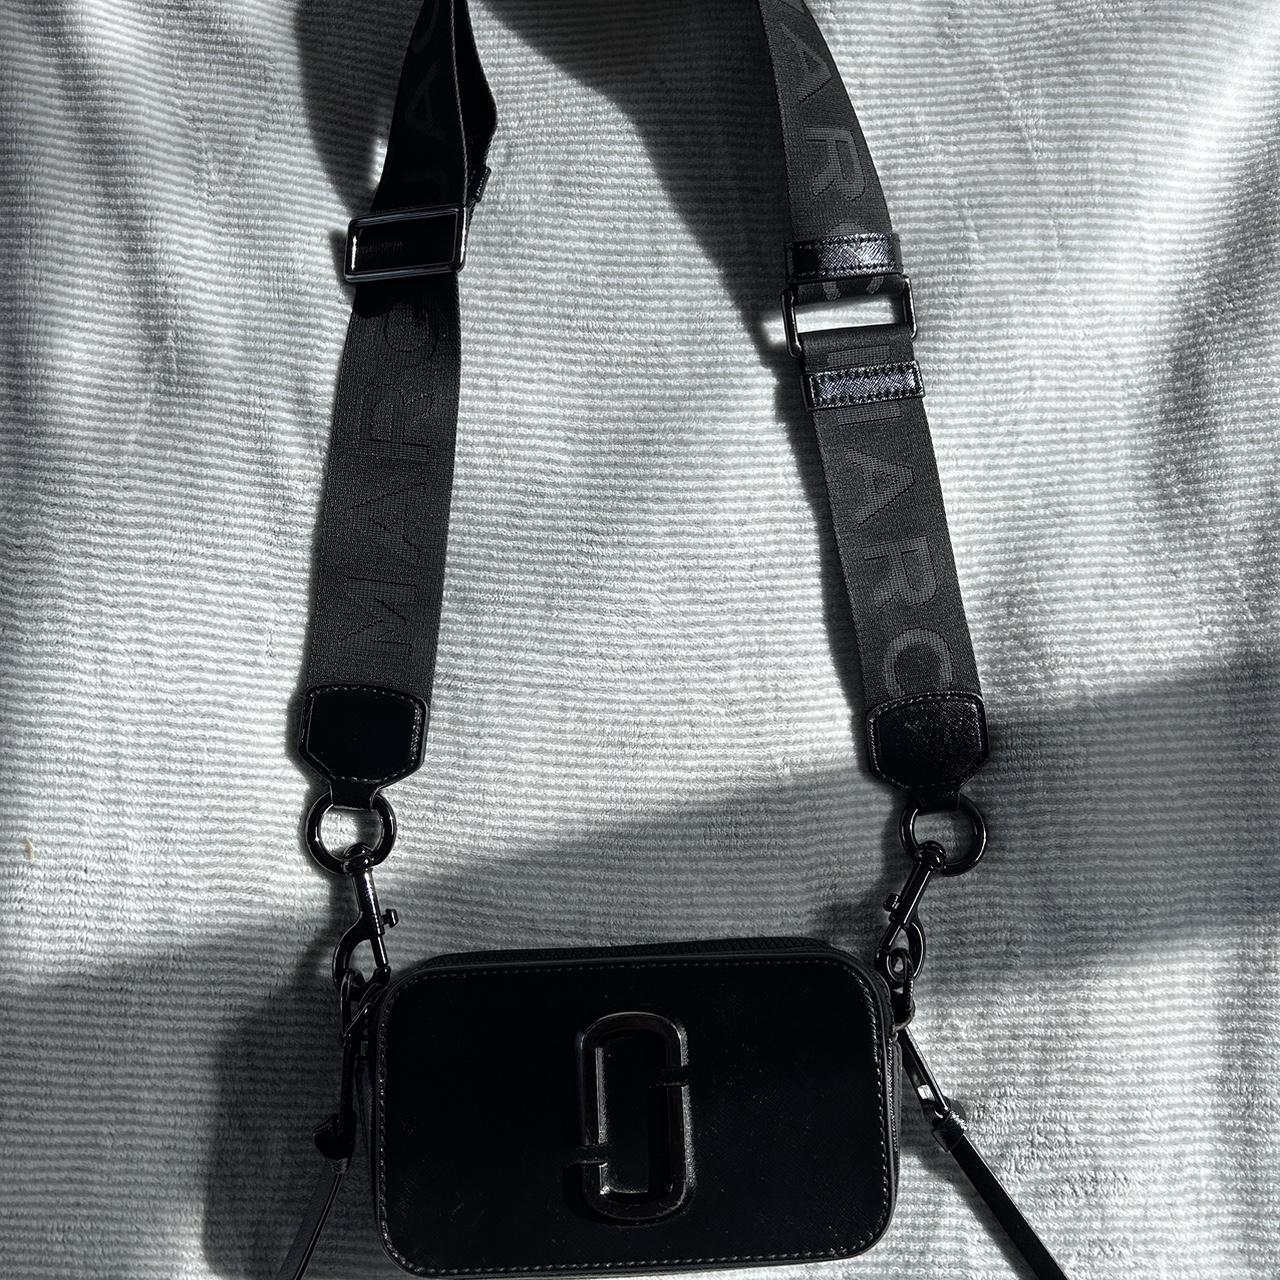 AUTHENTIC Marc Jacobs snapshot bag No tags on as I - Depop